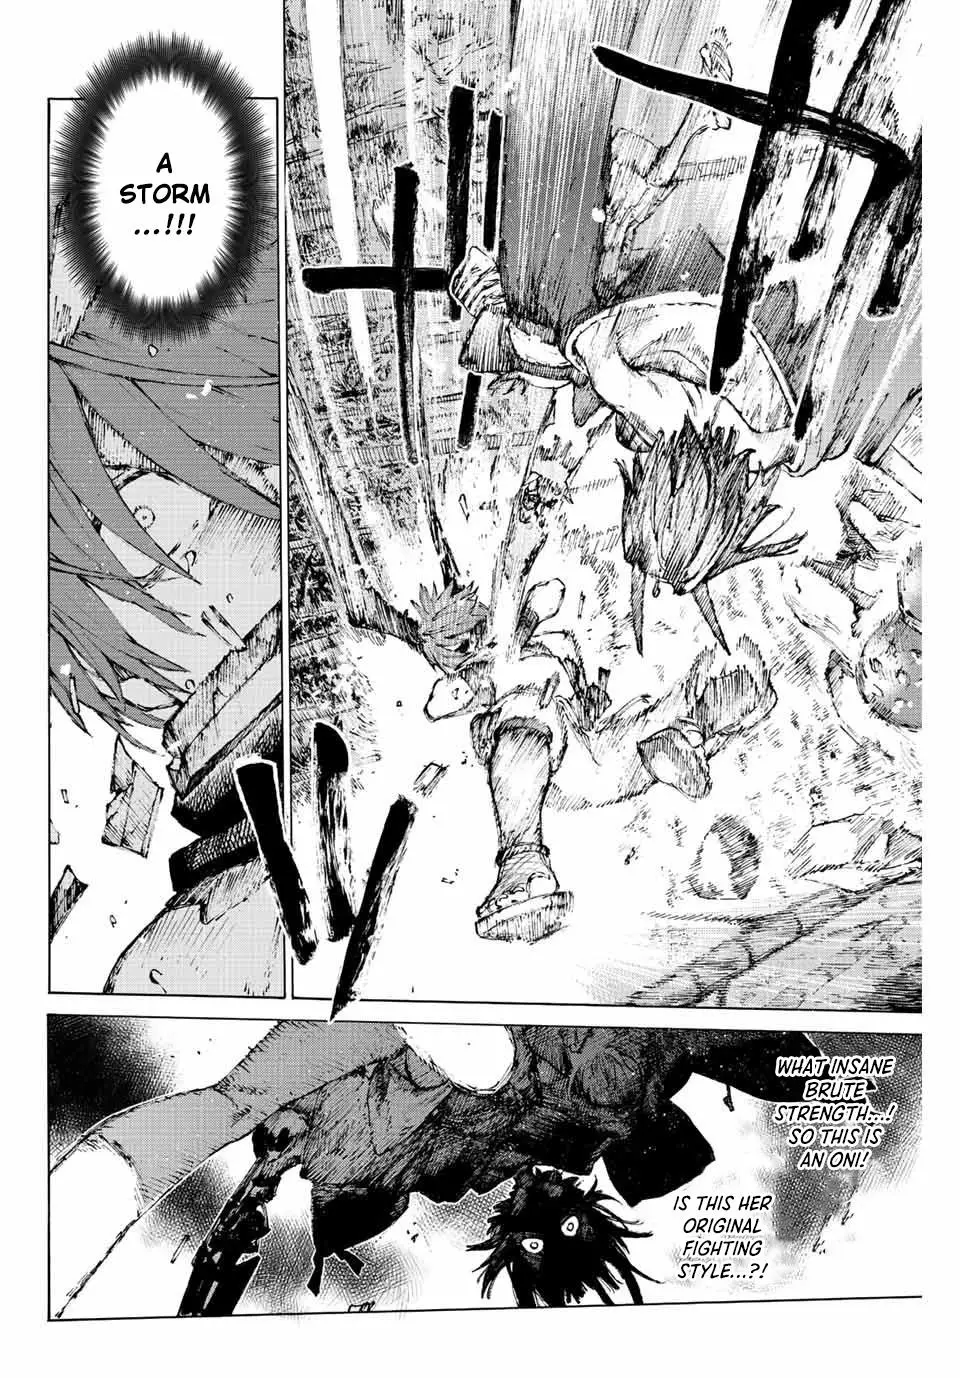 Fate/grand Order -Epic Of Remnant- Pseudo-Singularity Iii: The Stage Of Carnage, Shimousa - Seven Duels Of Swordmasters - 35 page 9-2e073853